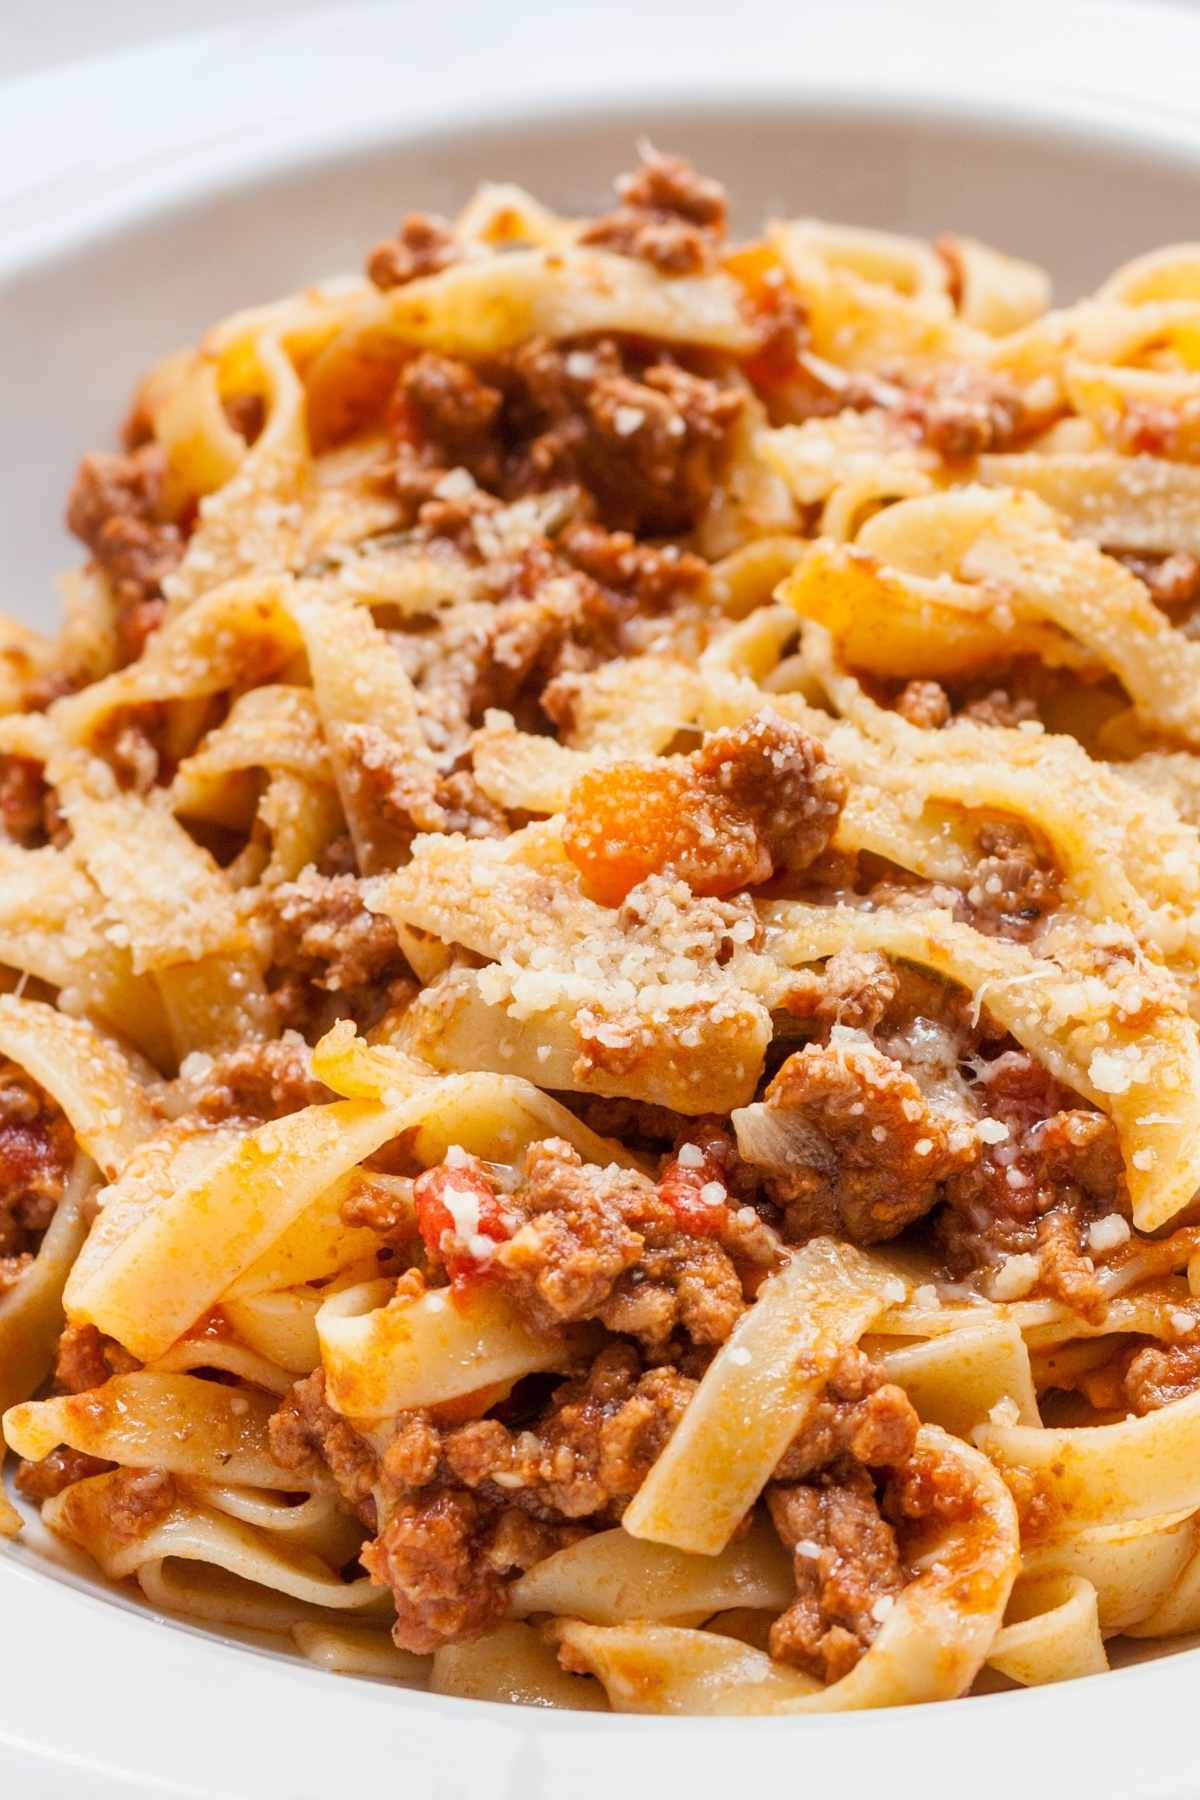 Tagliatelle Bolognese is a popular Italian dish that's loaded with tender tagliatelle noodles and rich bolognese sauce. It takes about 45 minutes to prepare, making it a good option for busy weeknights.